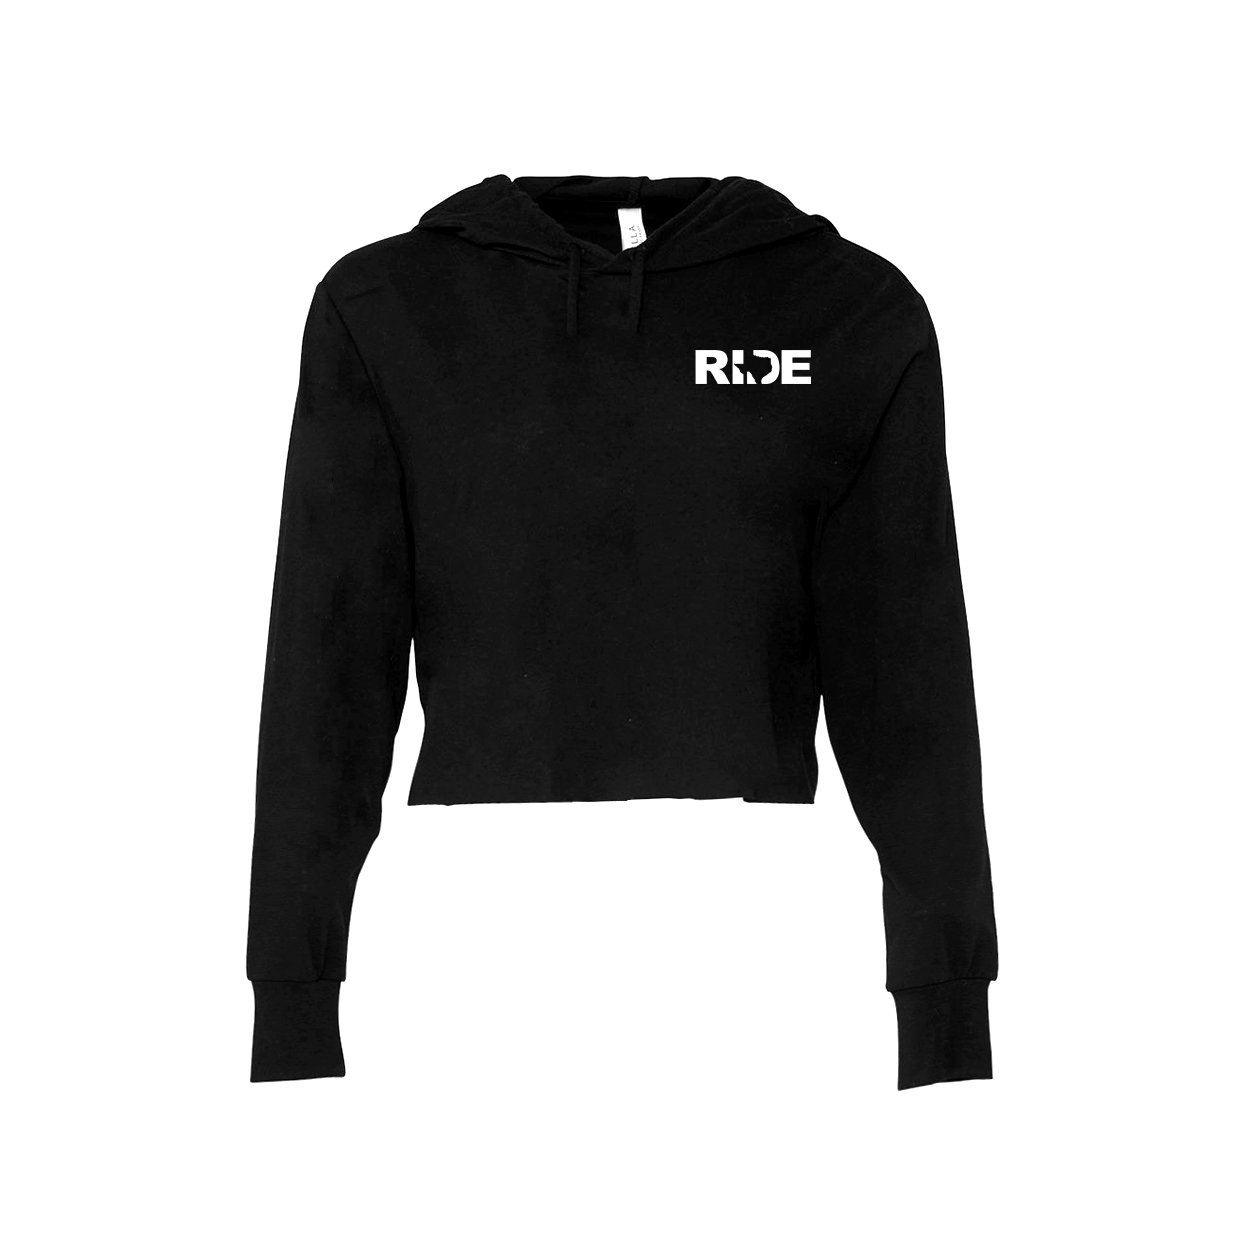 Ride Texas Night Out Womens Long Sleeve Cropped Hooded Tee Black 